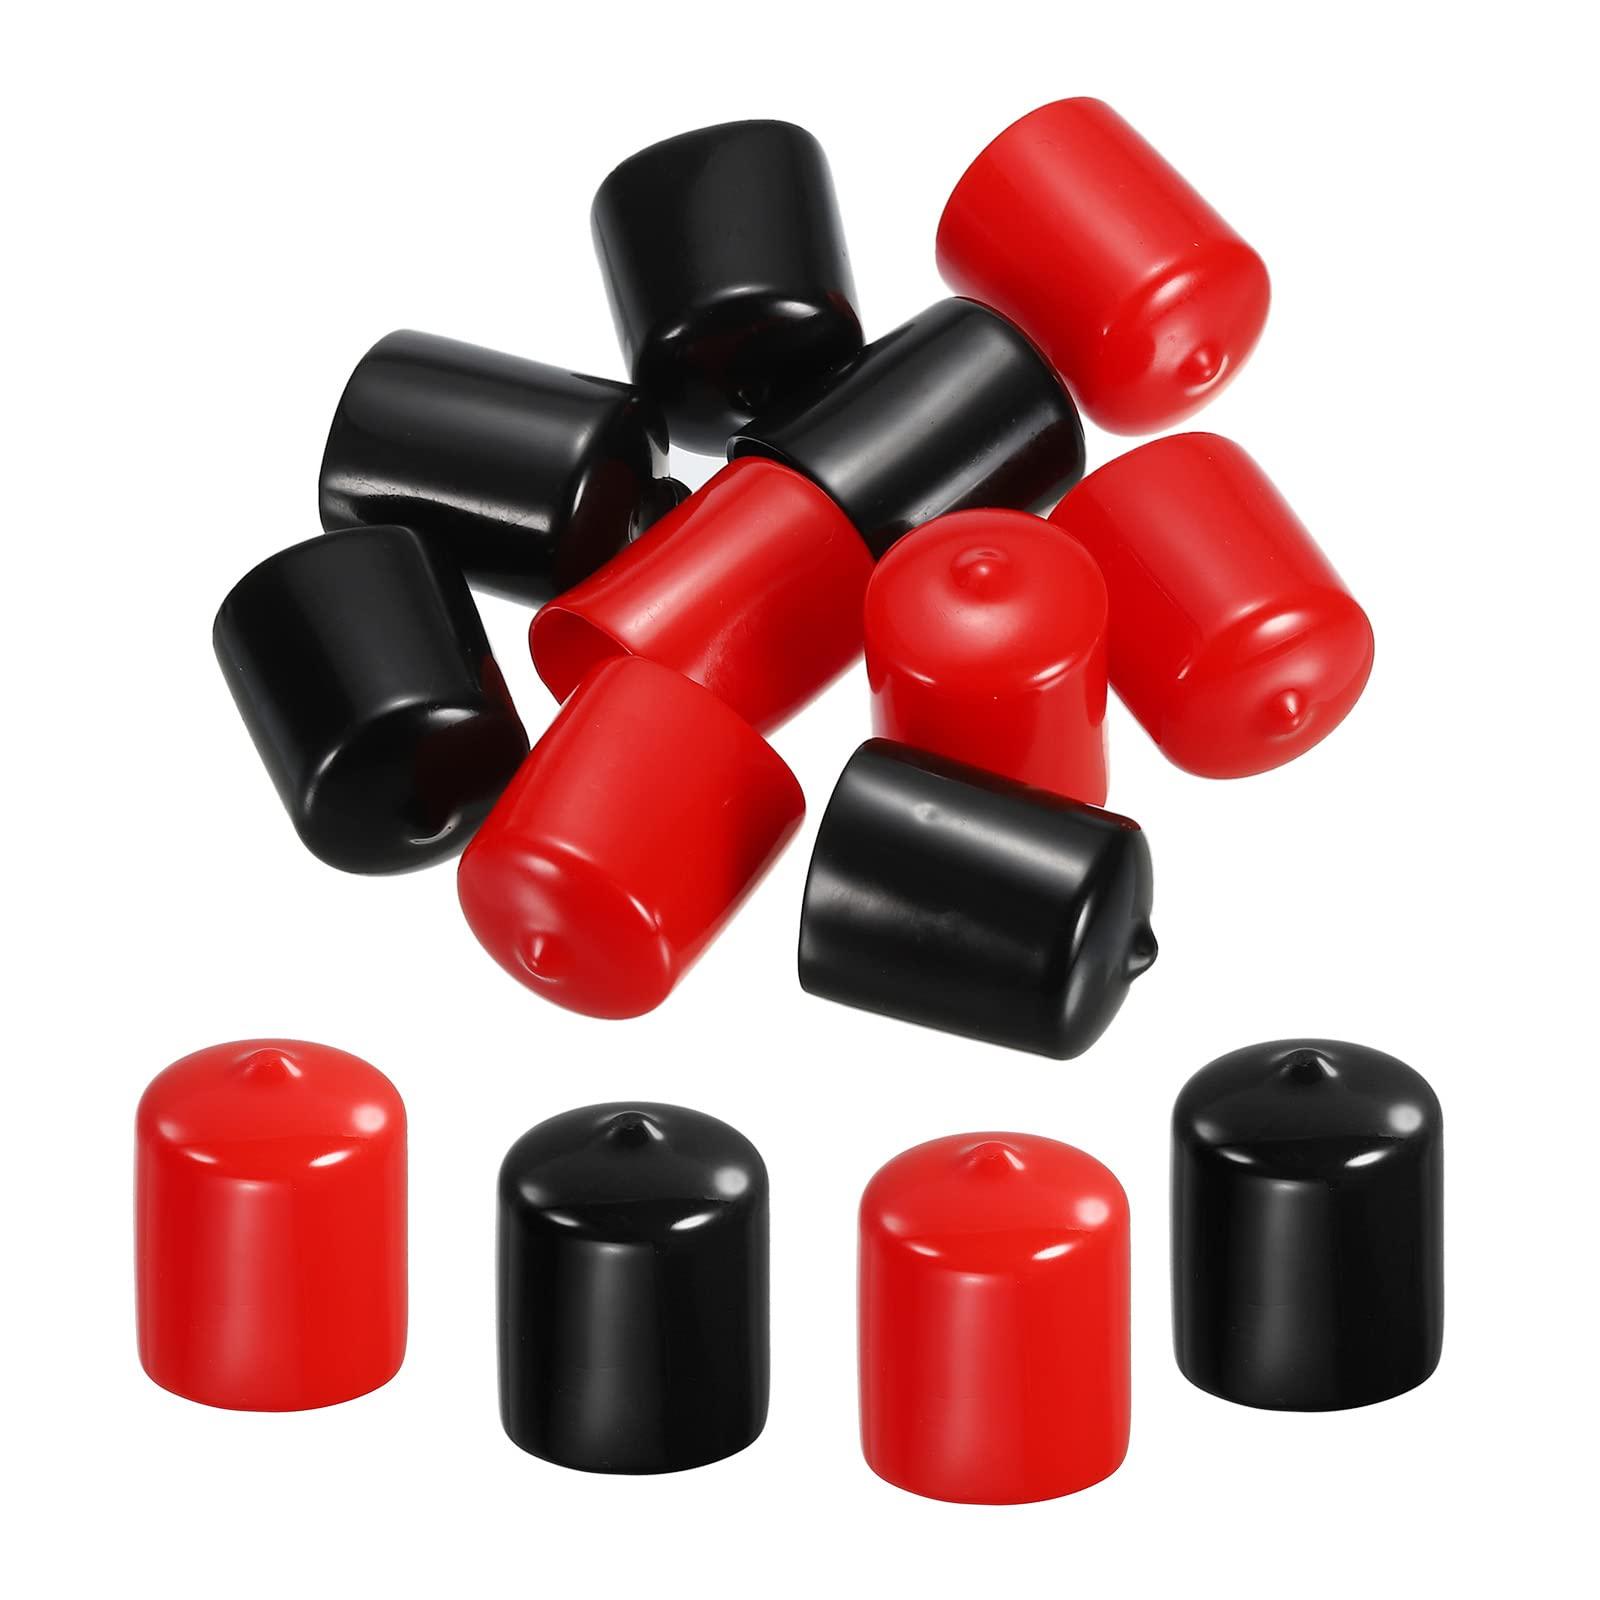 sourcing map 10pcs Rubber End Caps Cover Assortment 26mm PVC Vinyl Screw Thread Protector for Screw Bolt, Black Red 0